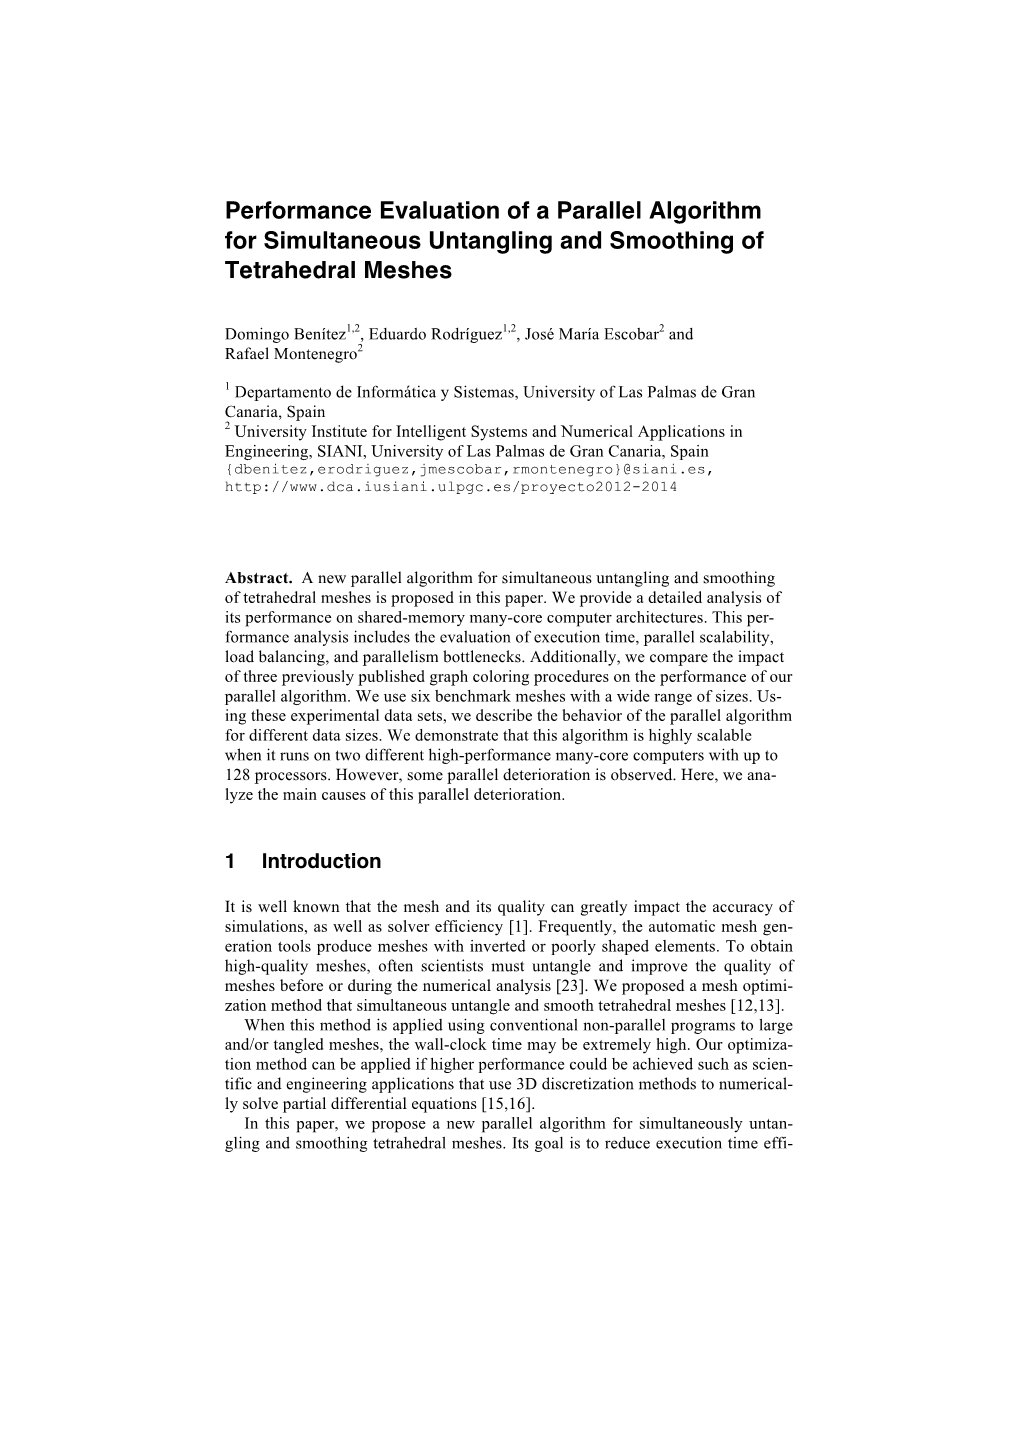 Performance Evaluation of a Parallel Algorithm for Simultaneous Untangling and Smoothing of Tetrahedral Meshes